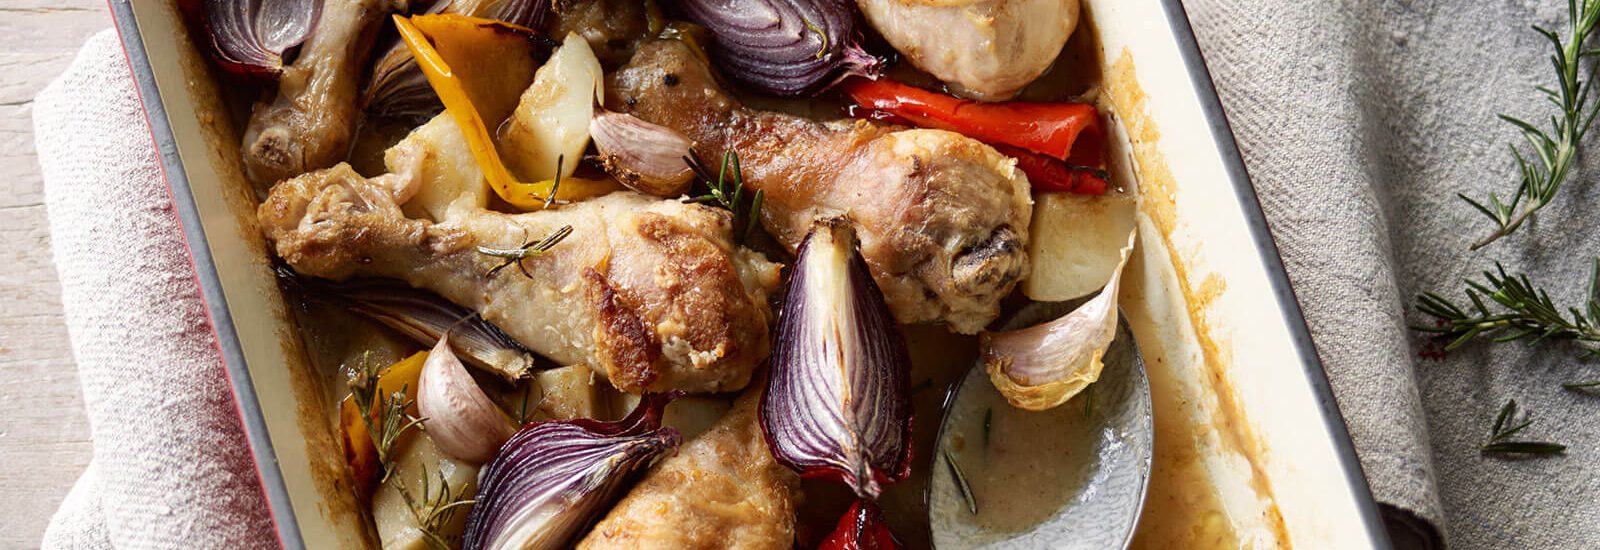 Manu’s Pan Roast Chicken and Vegetables